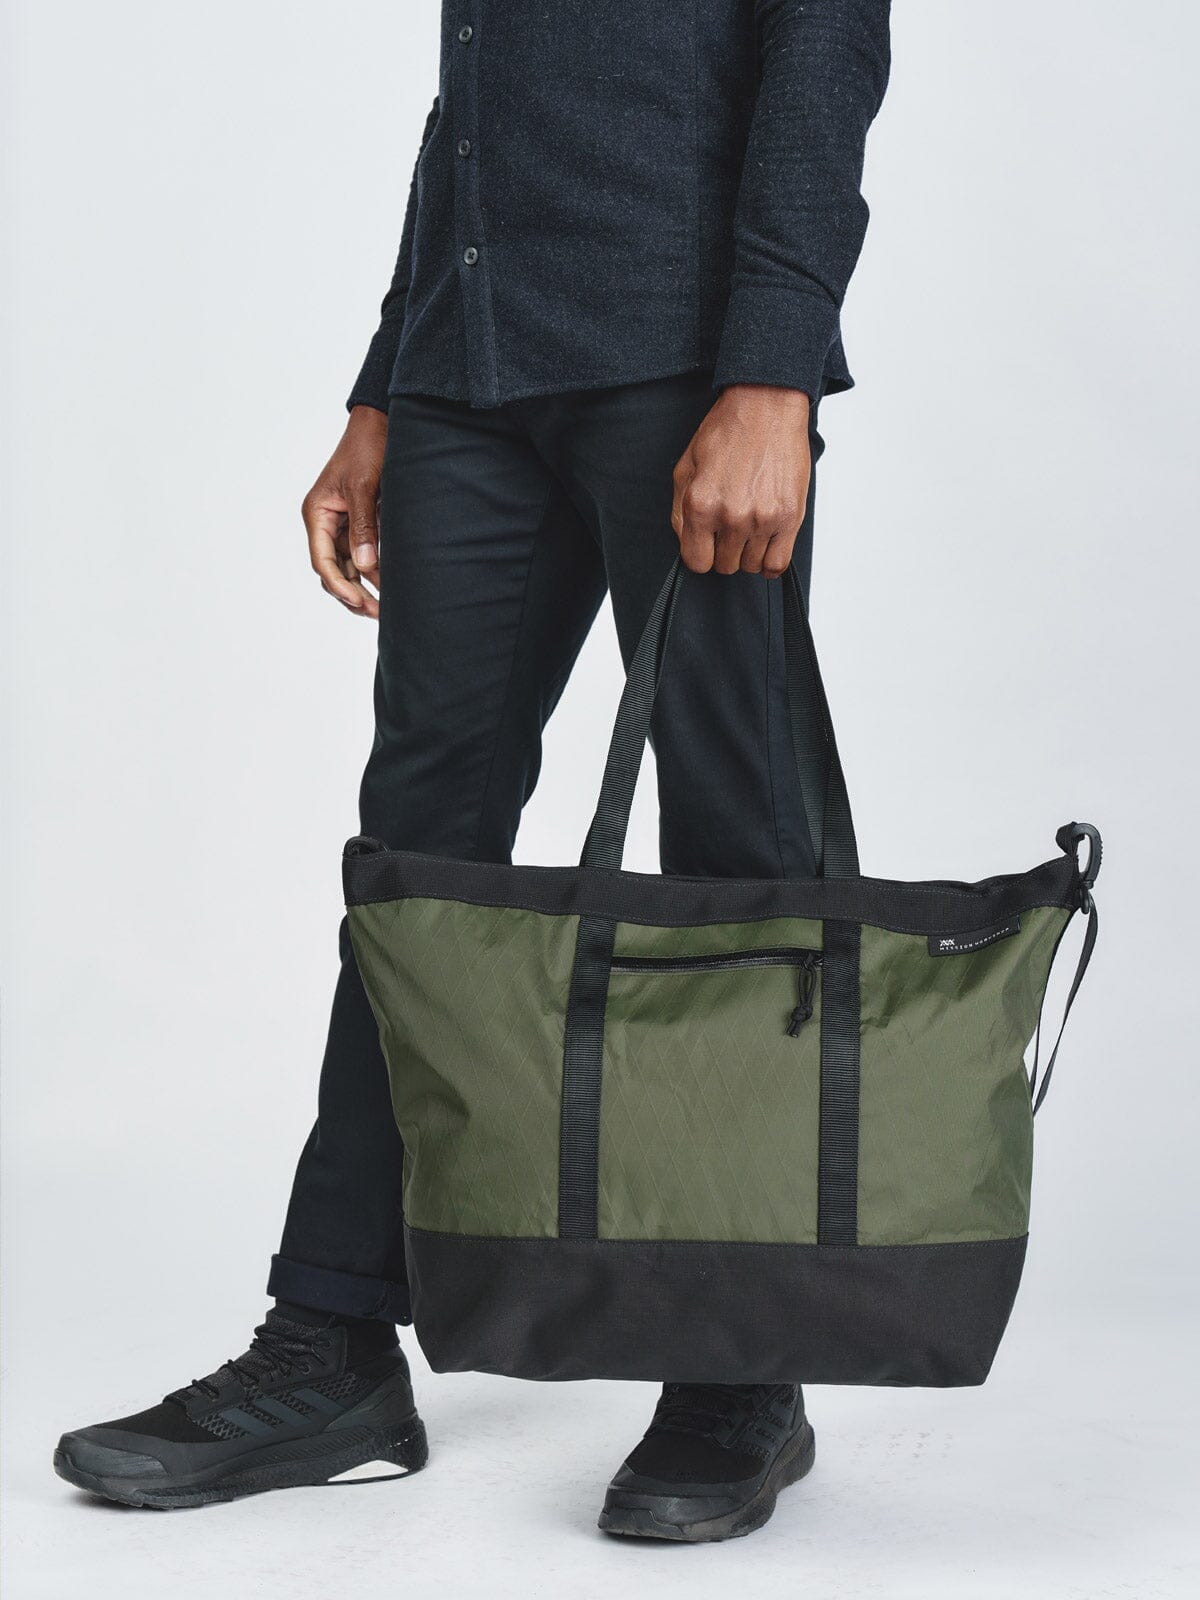 Helix 15L Tote by Mission Workshop - Weatherproof Bags & Technical Apparel - San Francisco & Los Angeles - Built to endure - Guaranteed forever